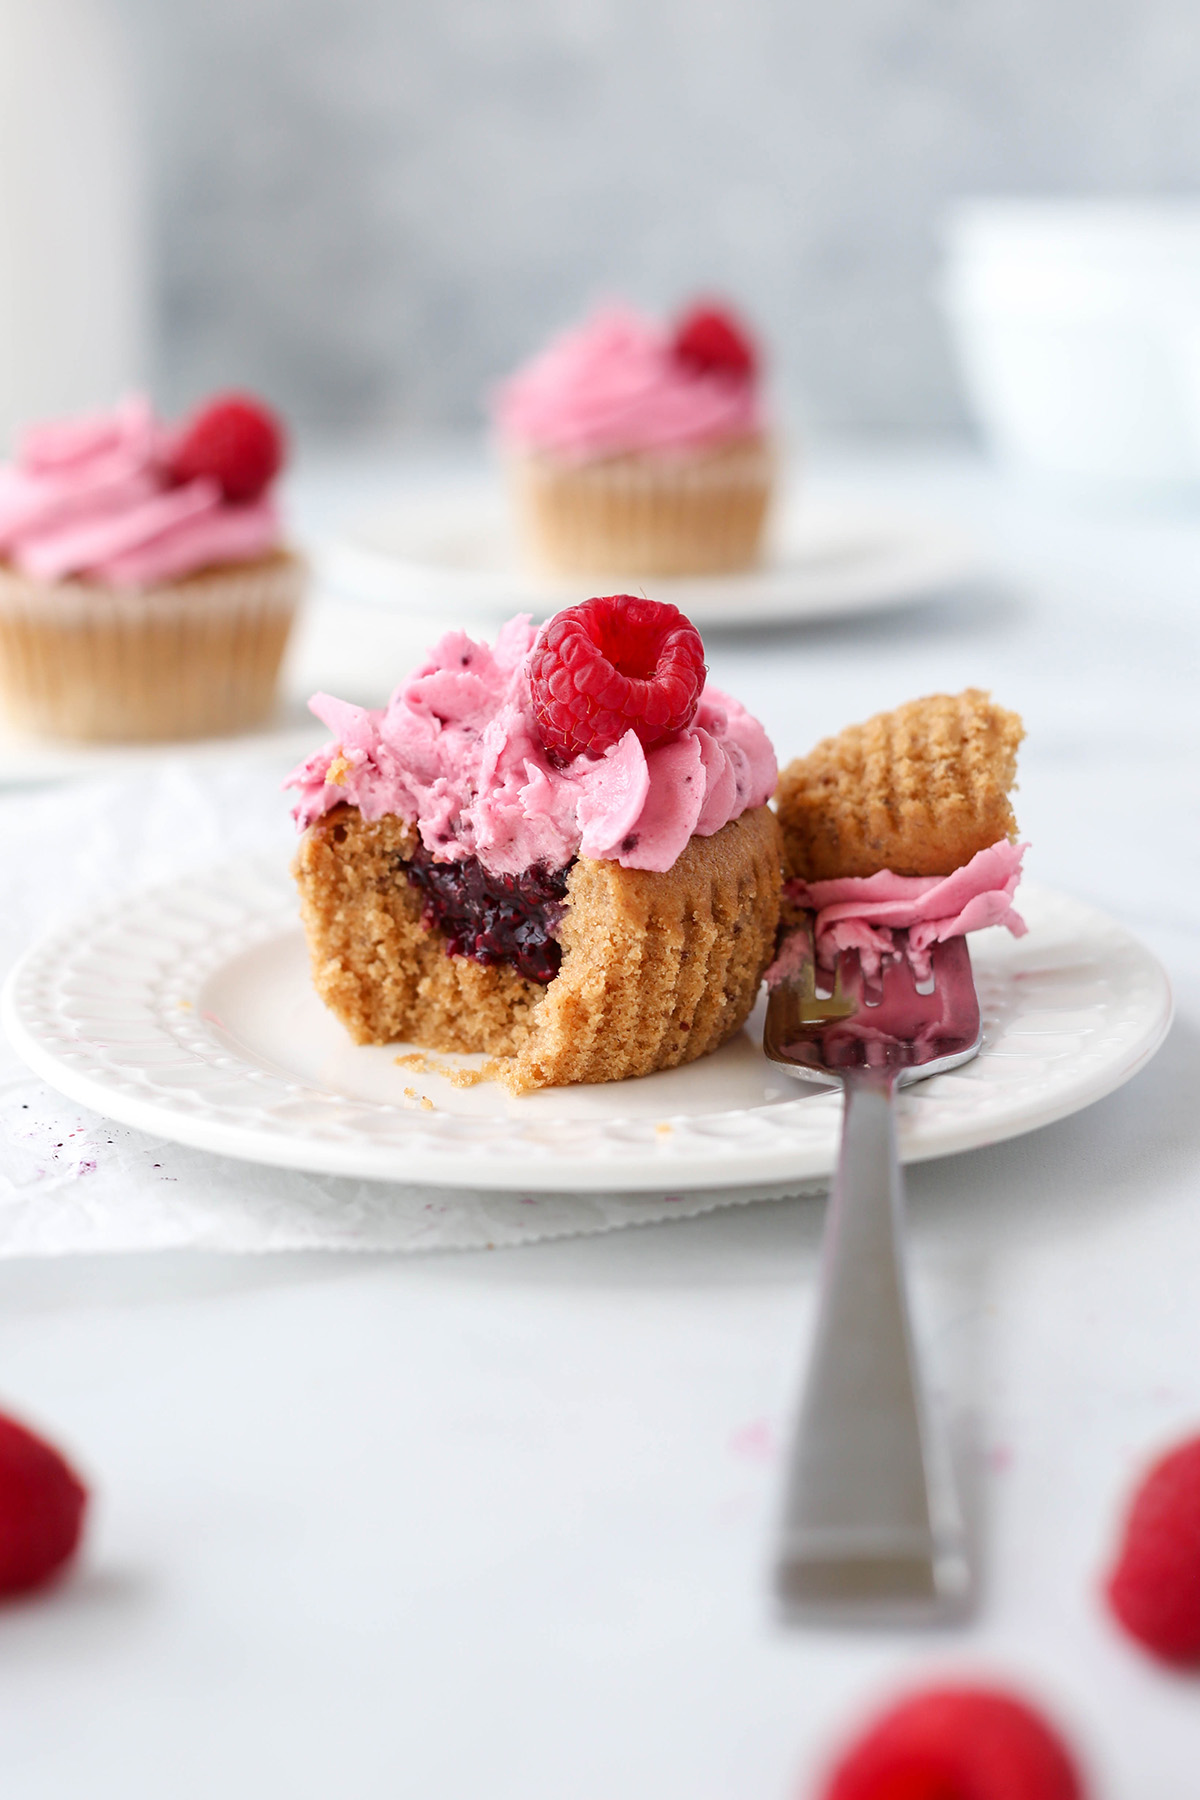 a lemon raspberry cupcake on a plate, showing the jam filling inside